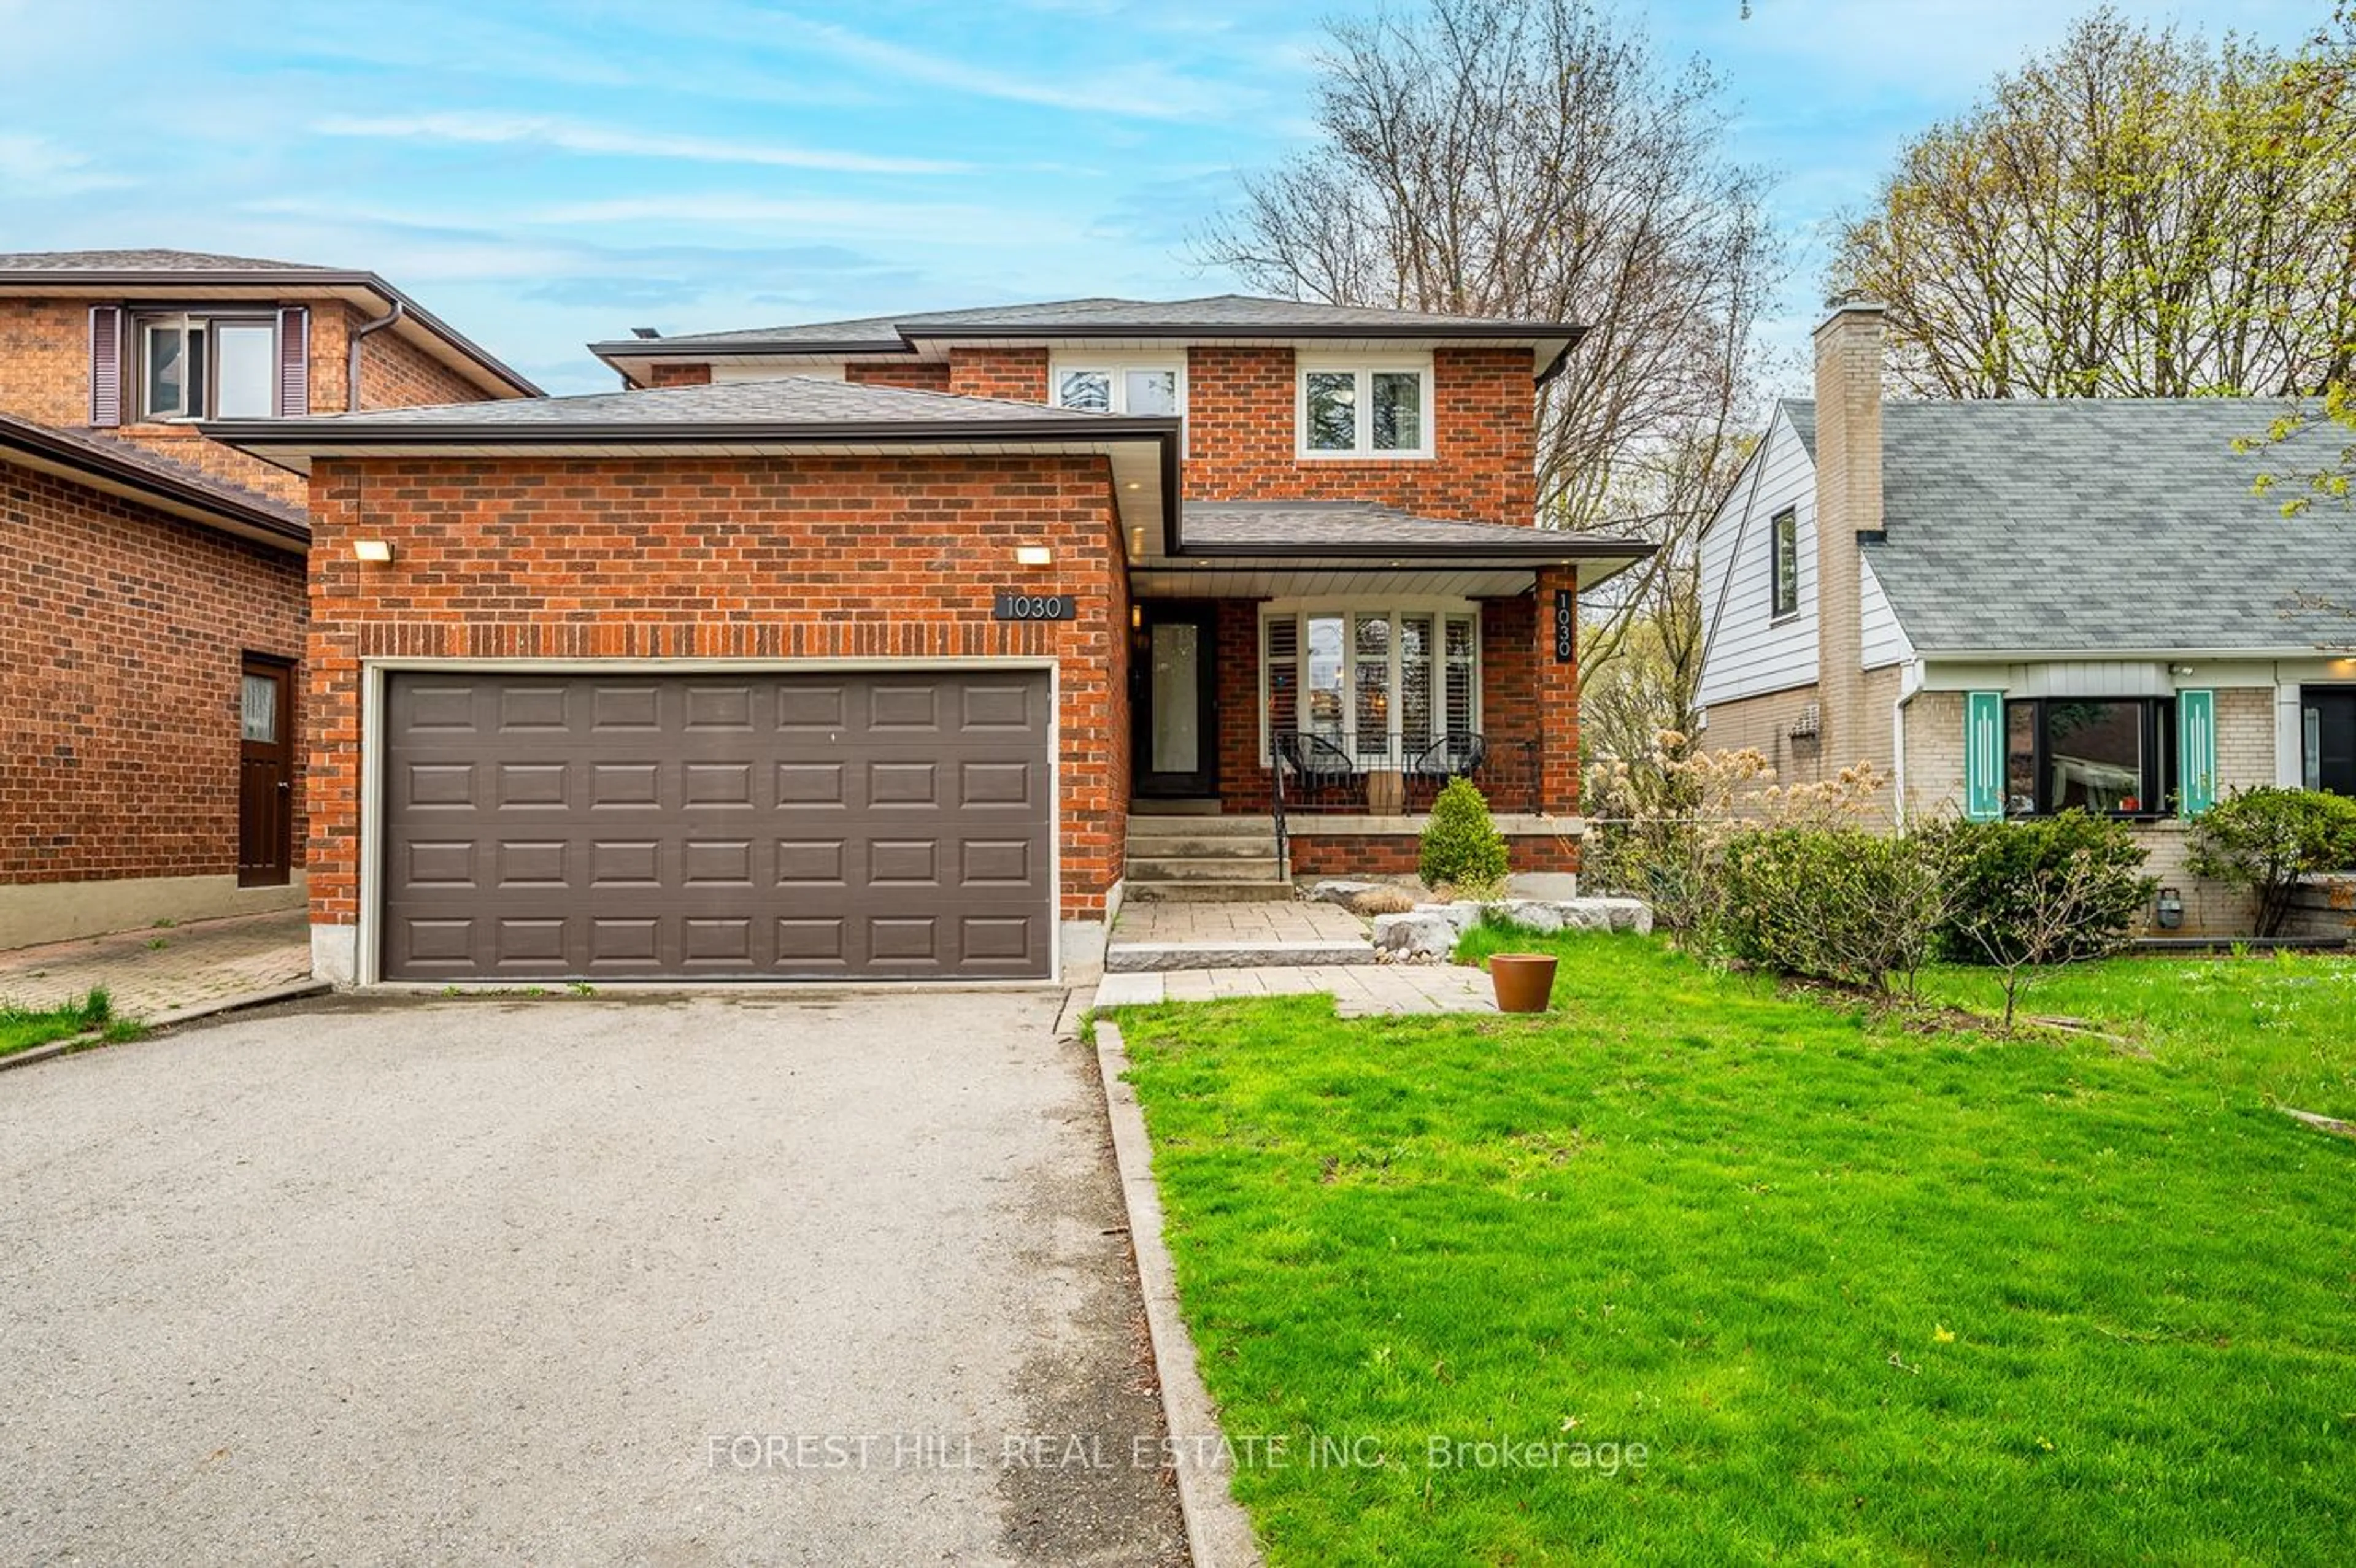 Home with brick exterior material for 1030 Hedge Dr, Mississauga Ontario L4Y 1G2